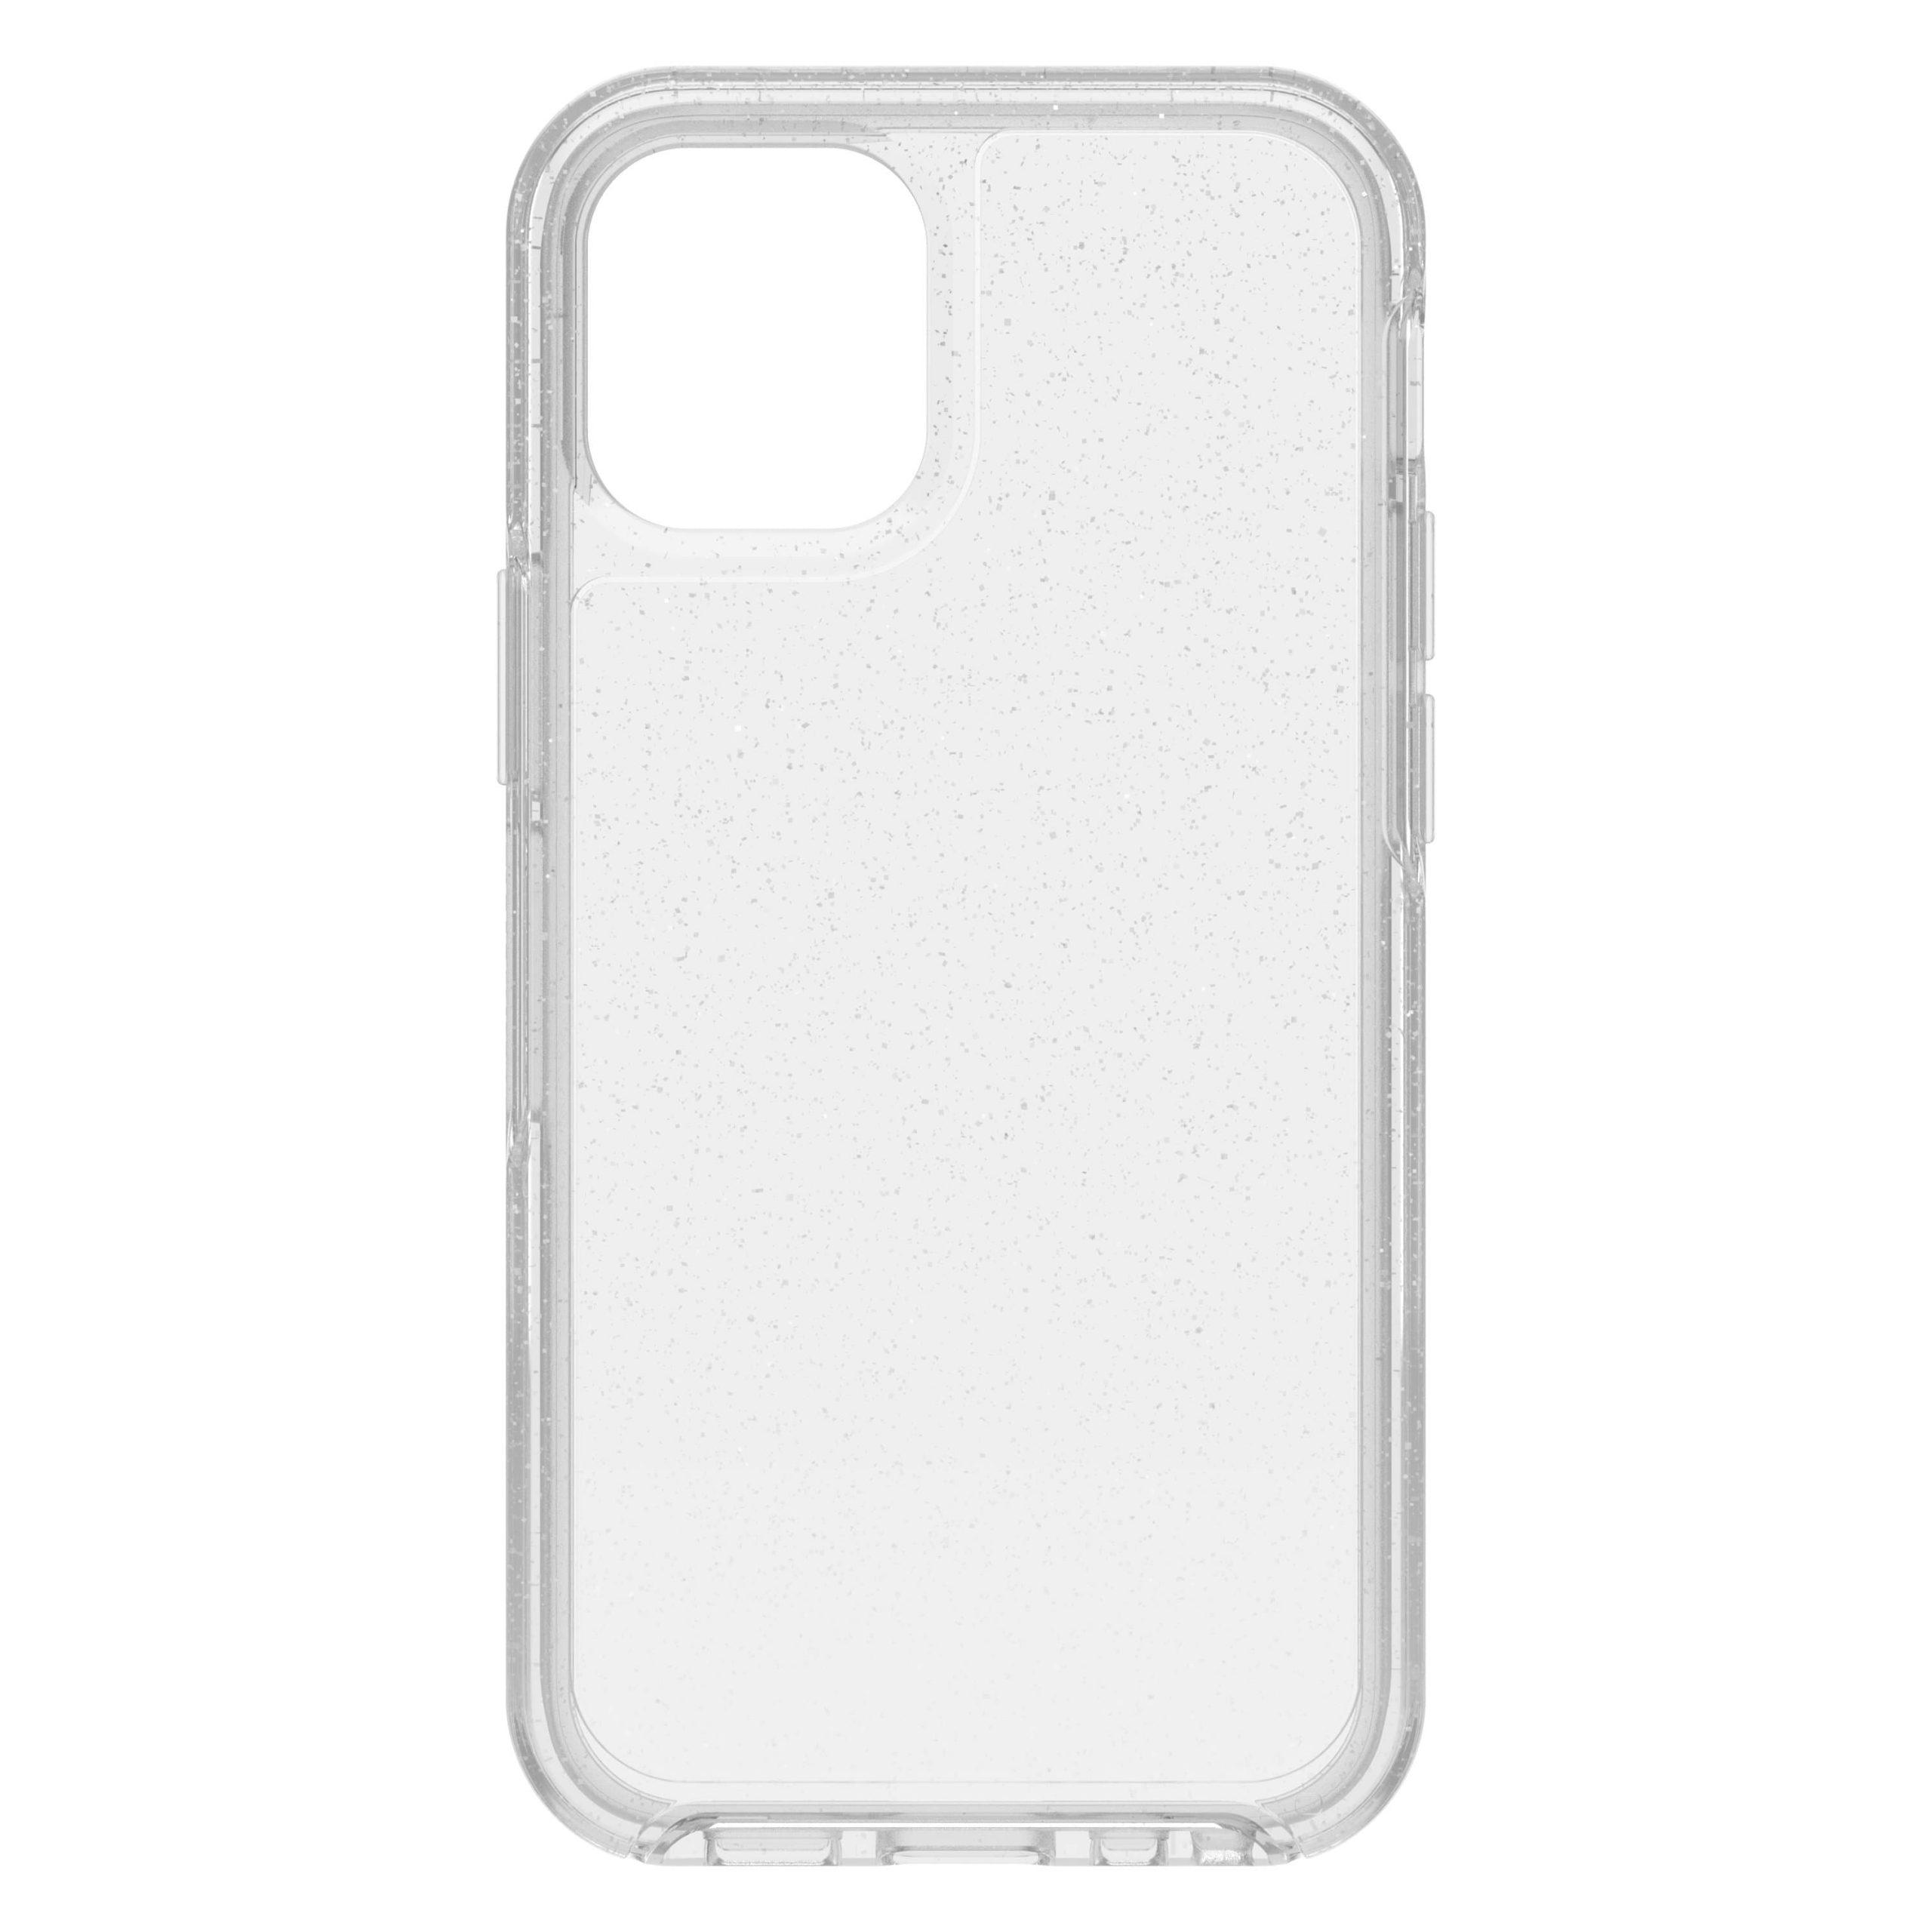 otterbox apple iphone 12 mini symmetry clear case slim and lightweight cover w military grade drop protection wireless charging compatible stardust